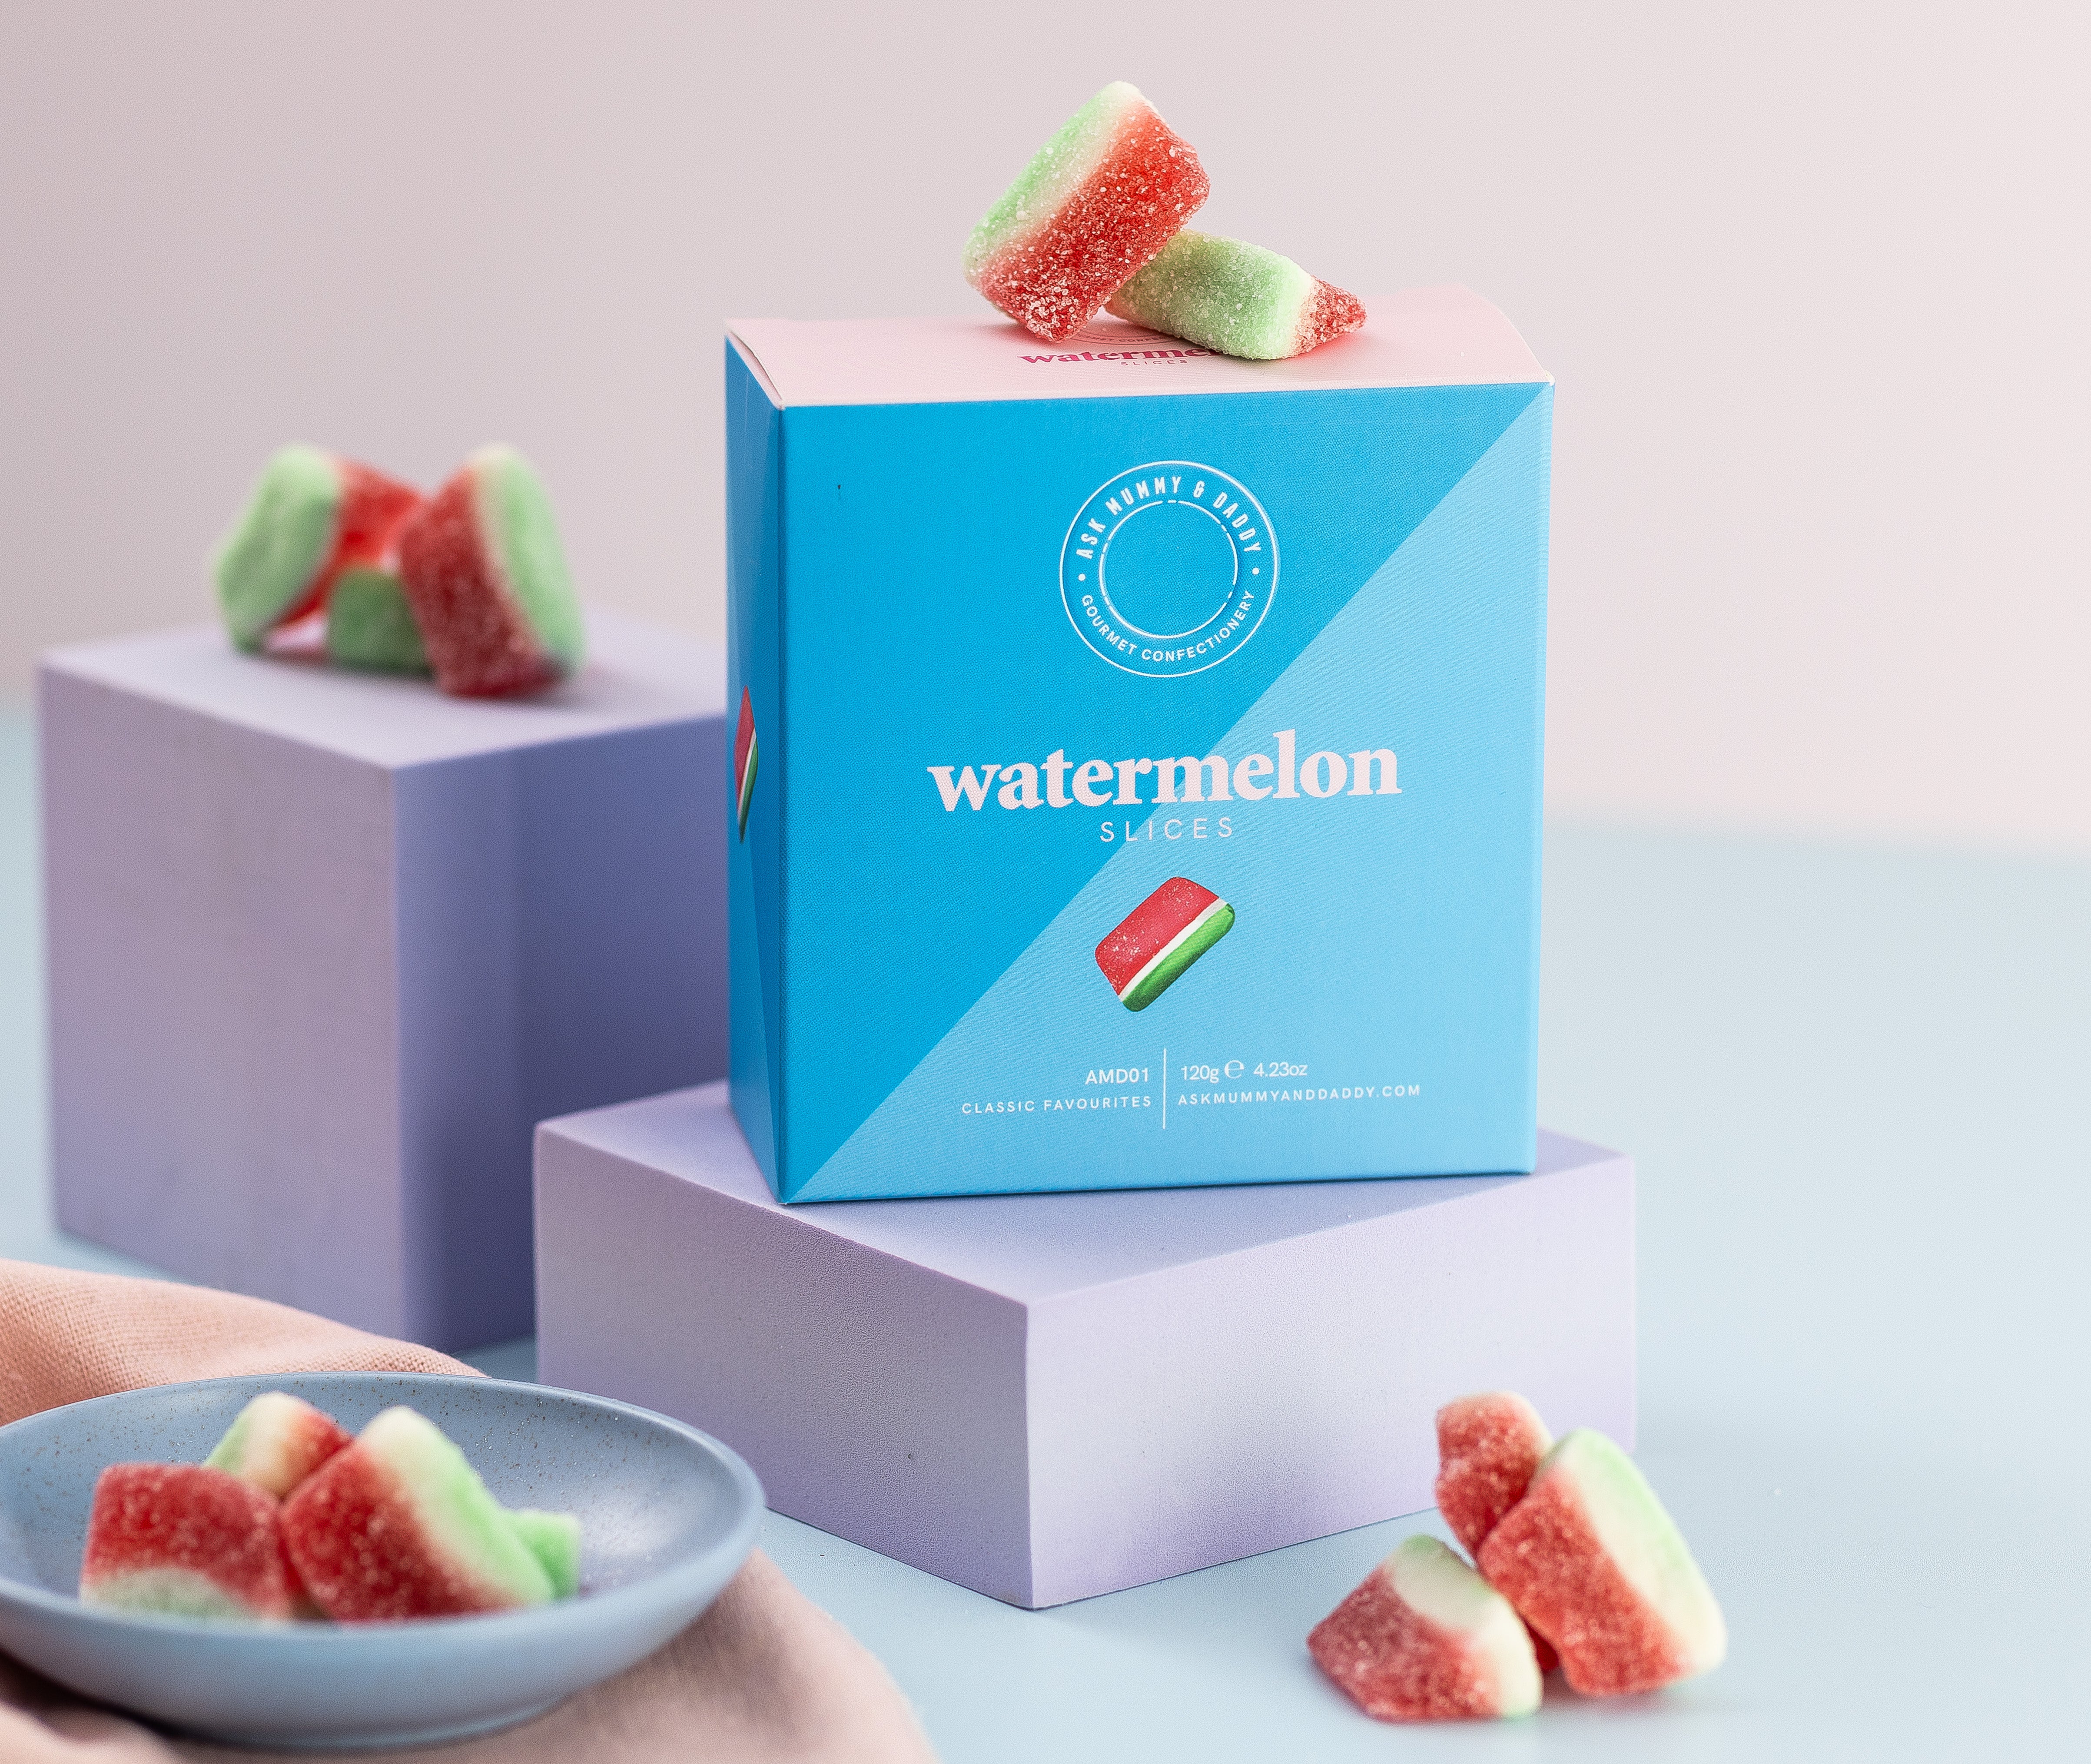 Prodct information banner - Watermelon Slices Gift Box